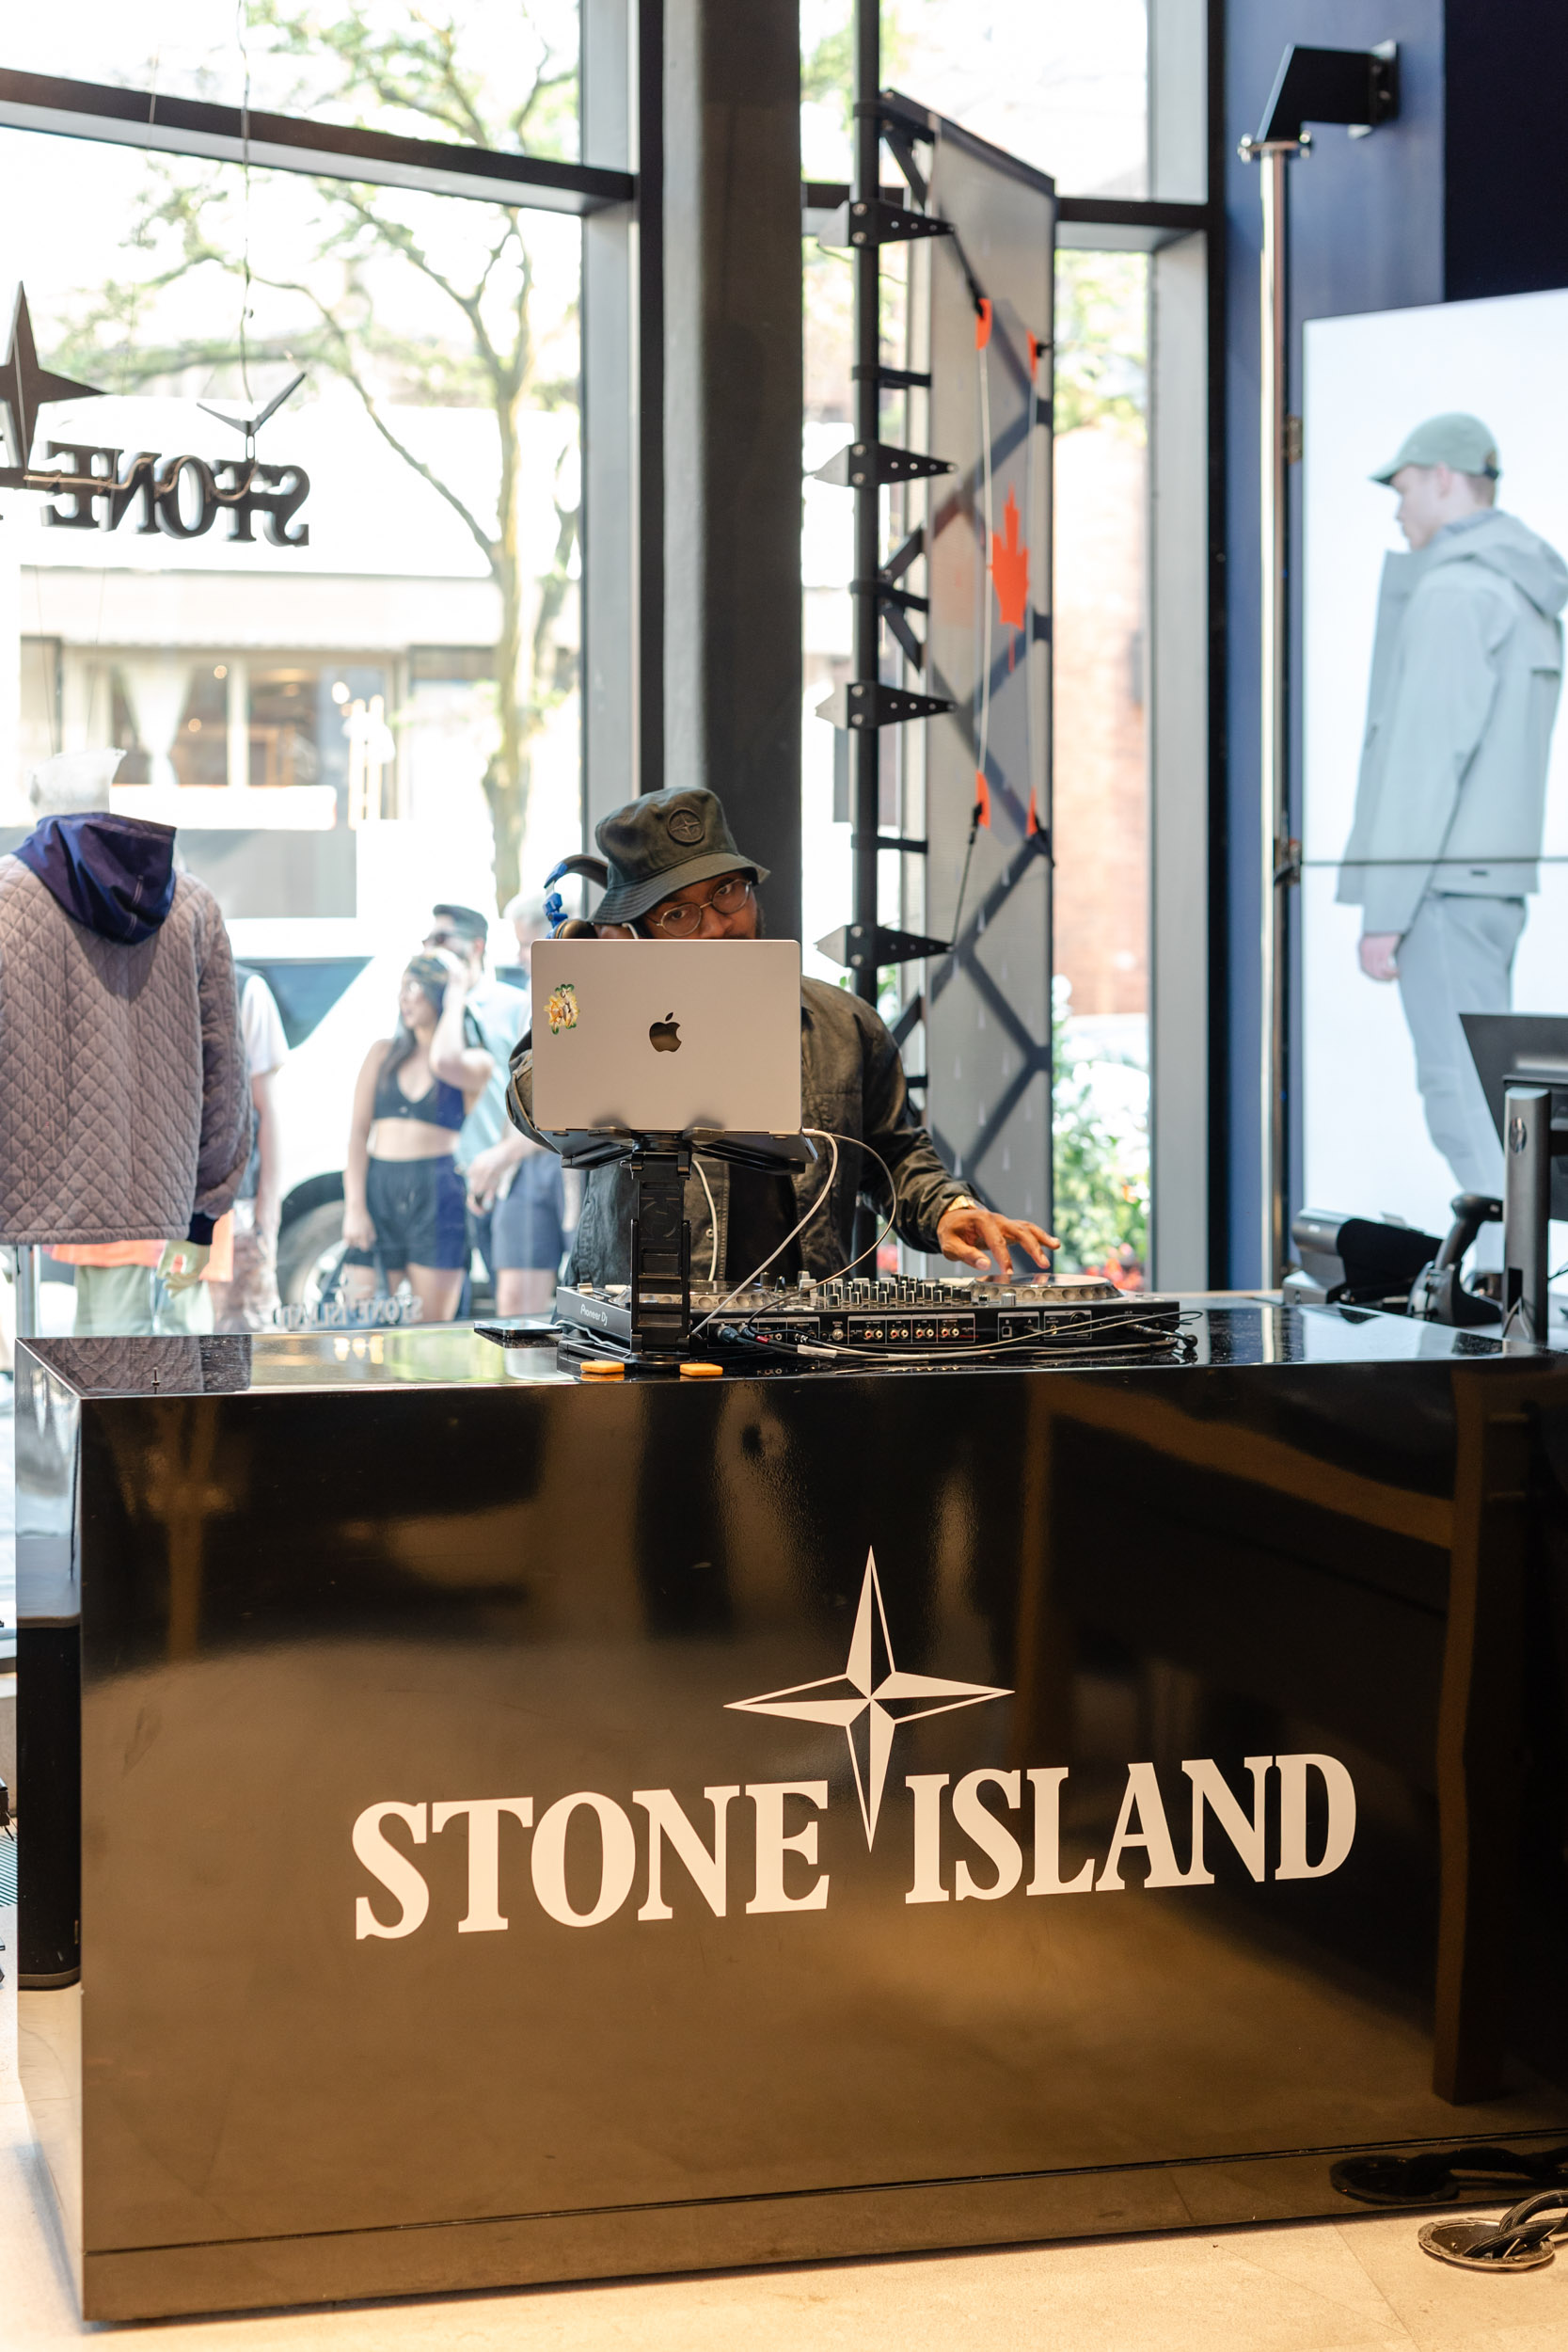 Stone Island party in Yorkville